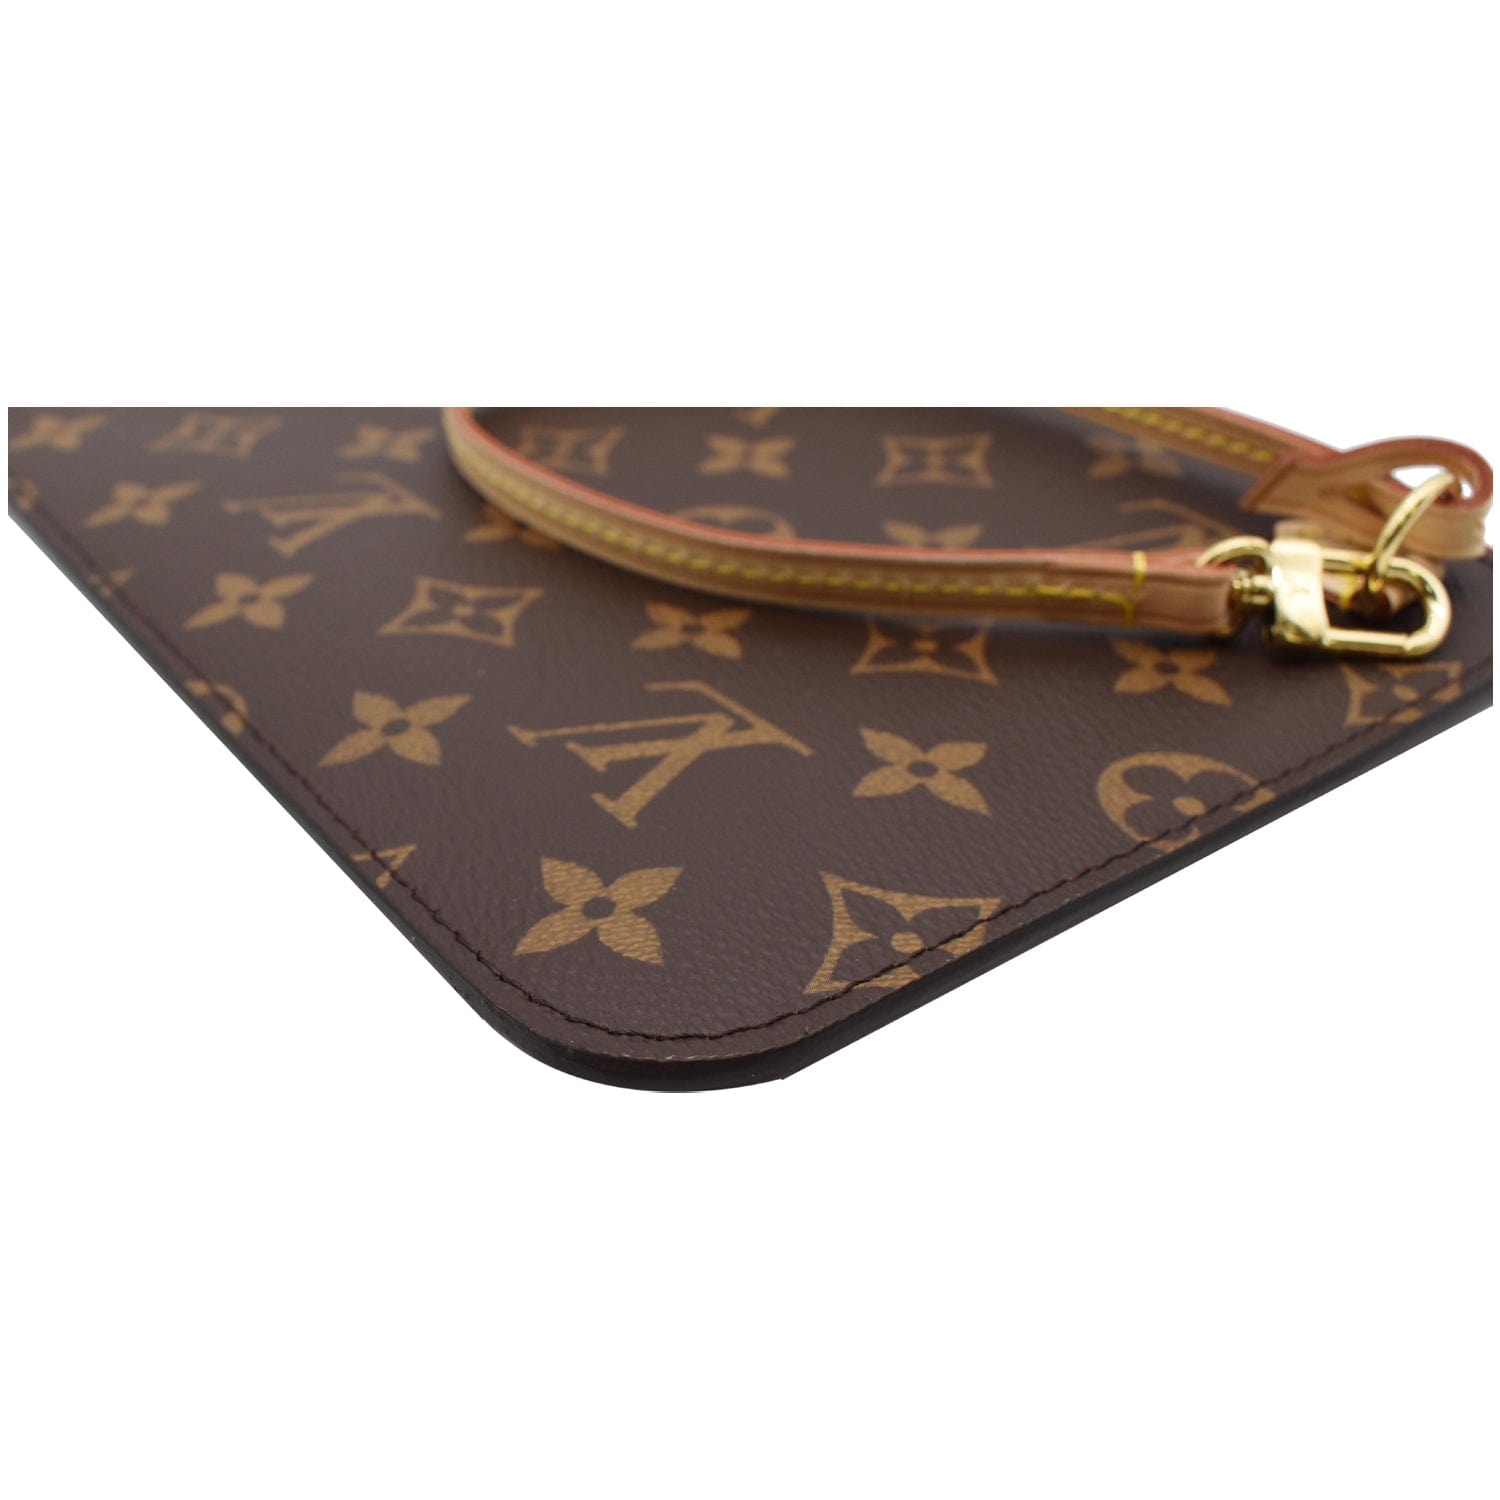 Neverfull Pouch Canvas Wristlet